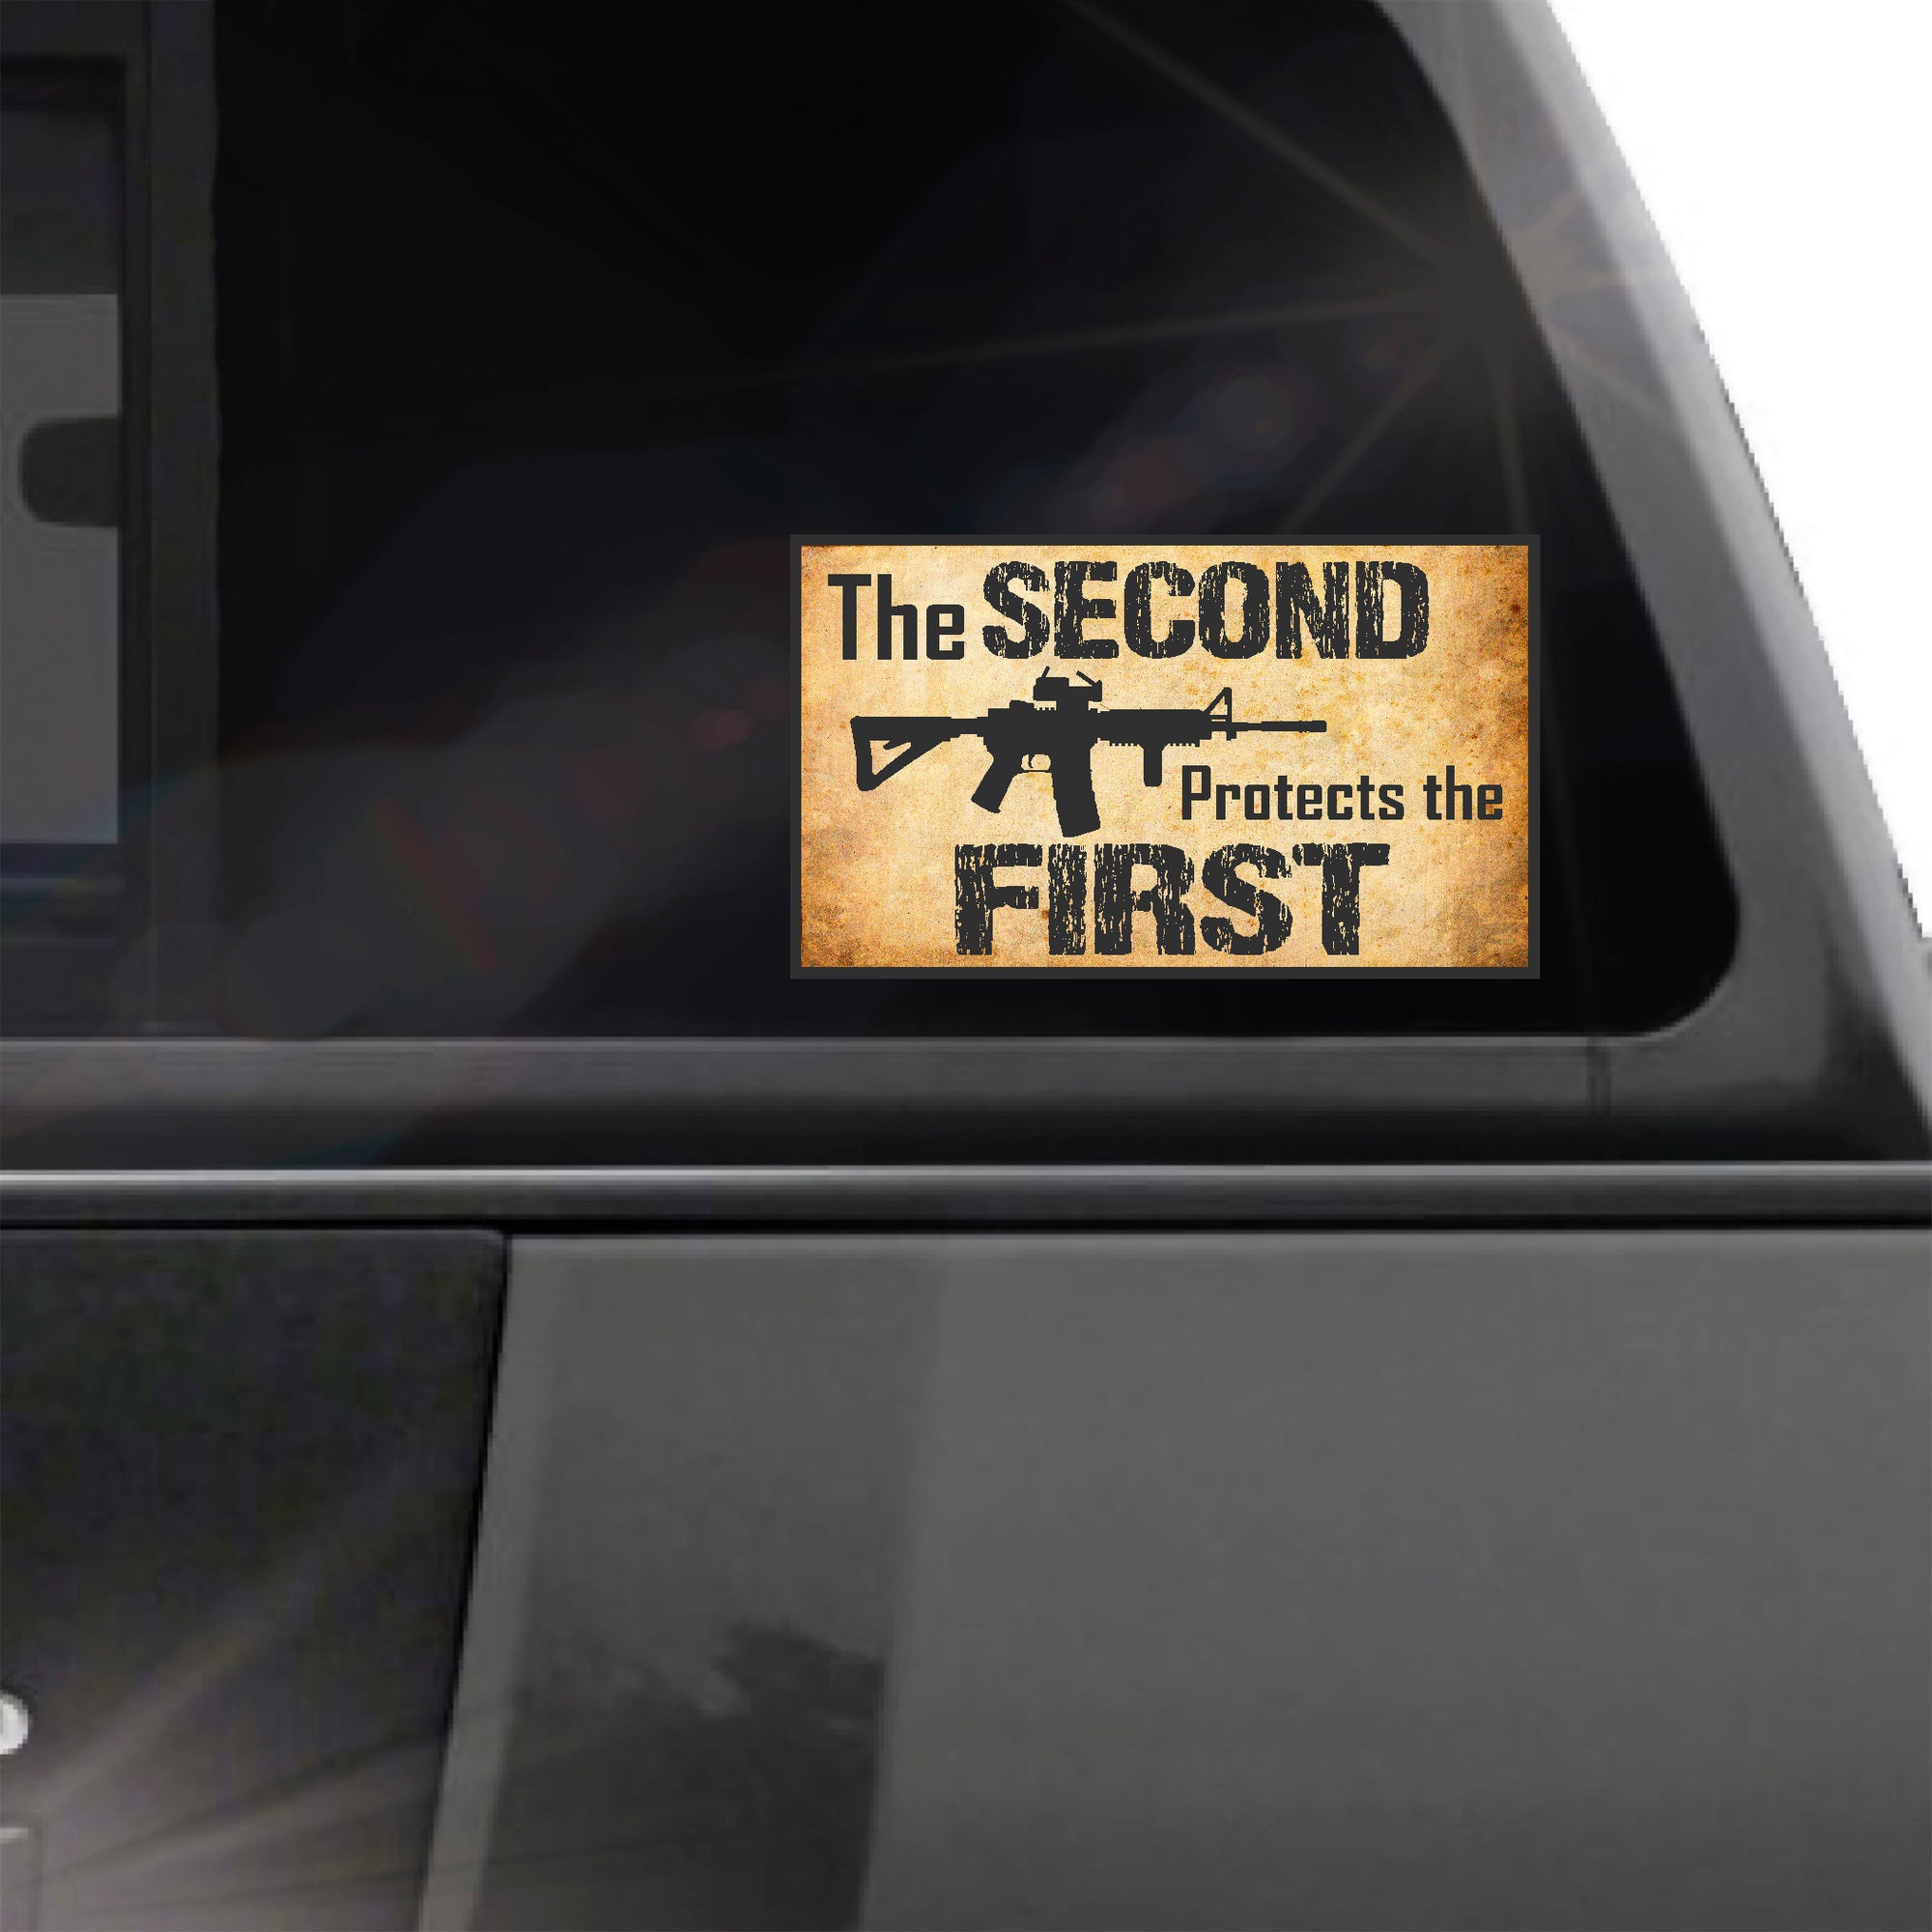 The 2nd Protects the 1st Constitution sticker